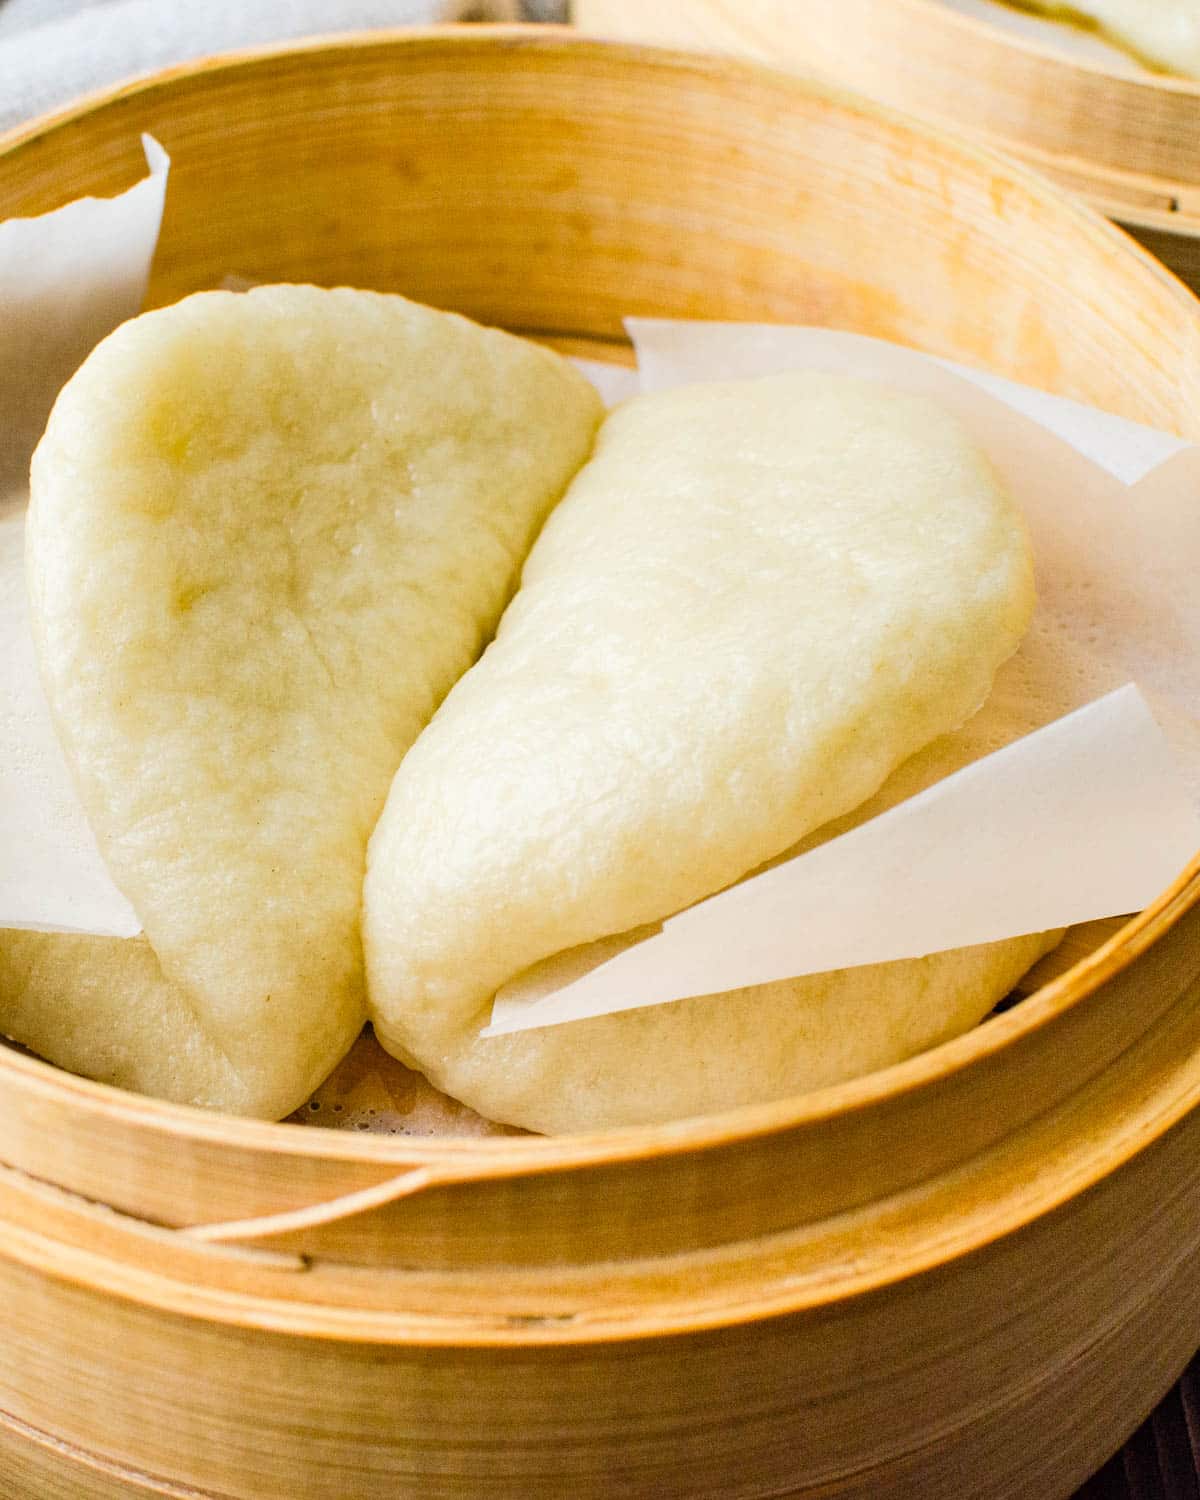 The steamed bao buns are fluffy and light.